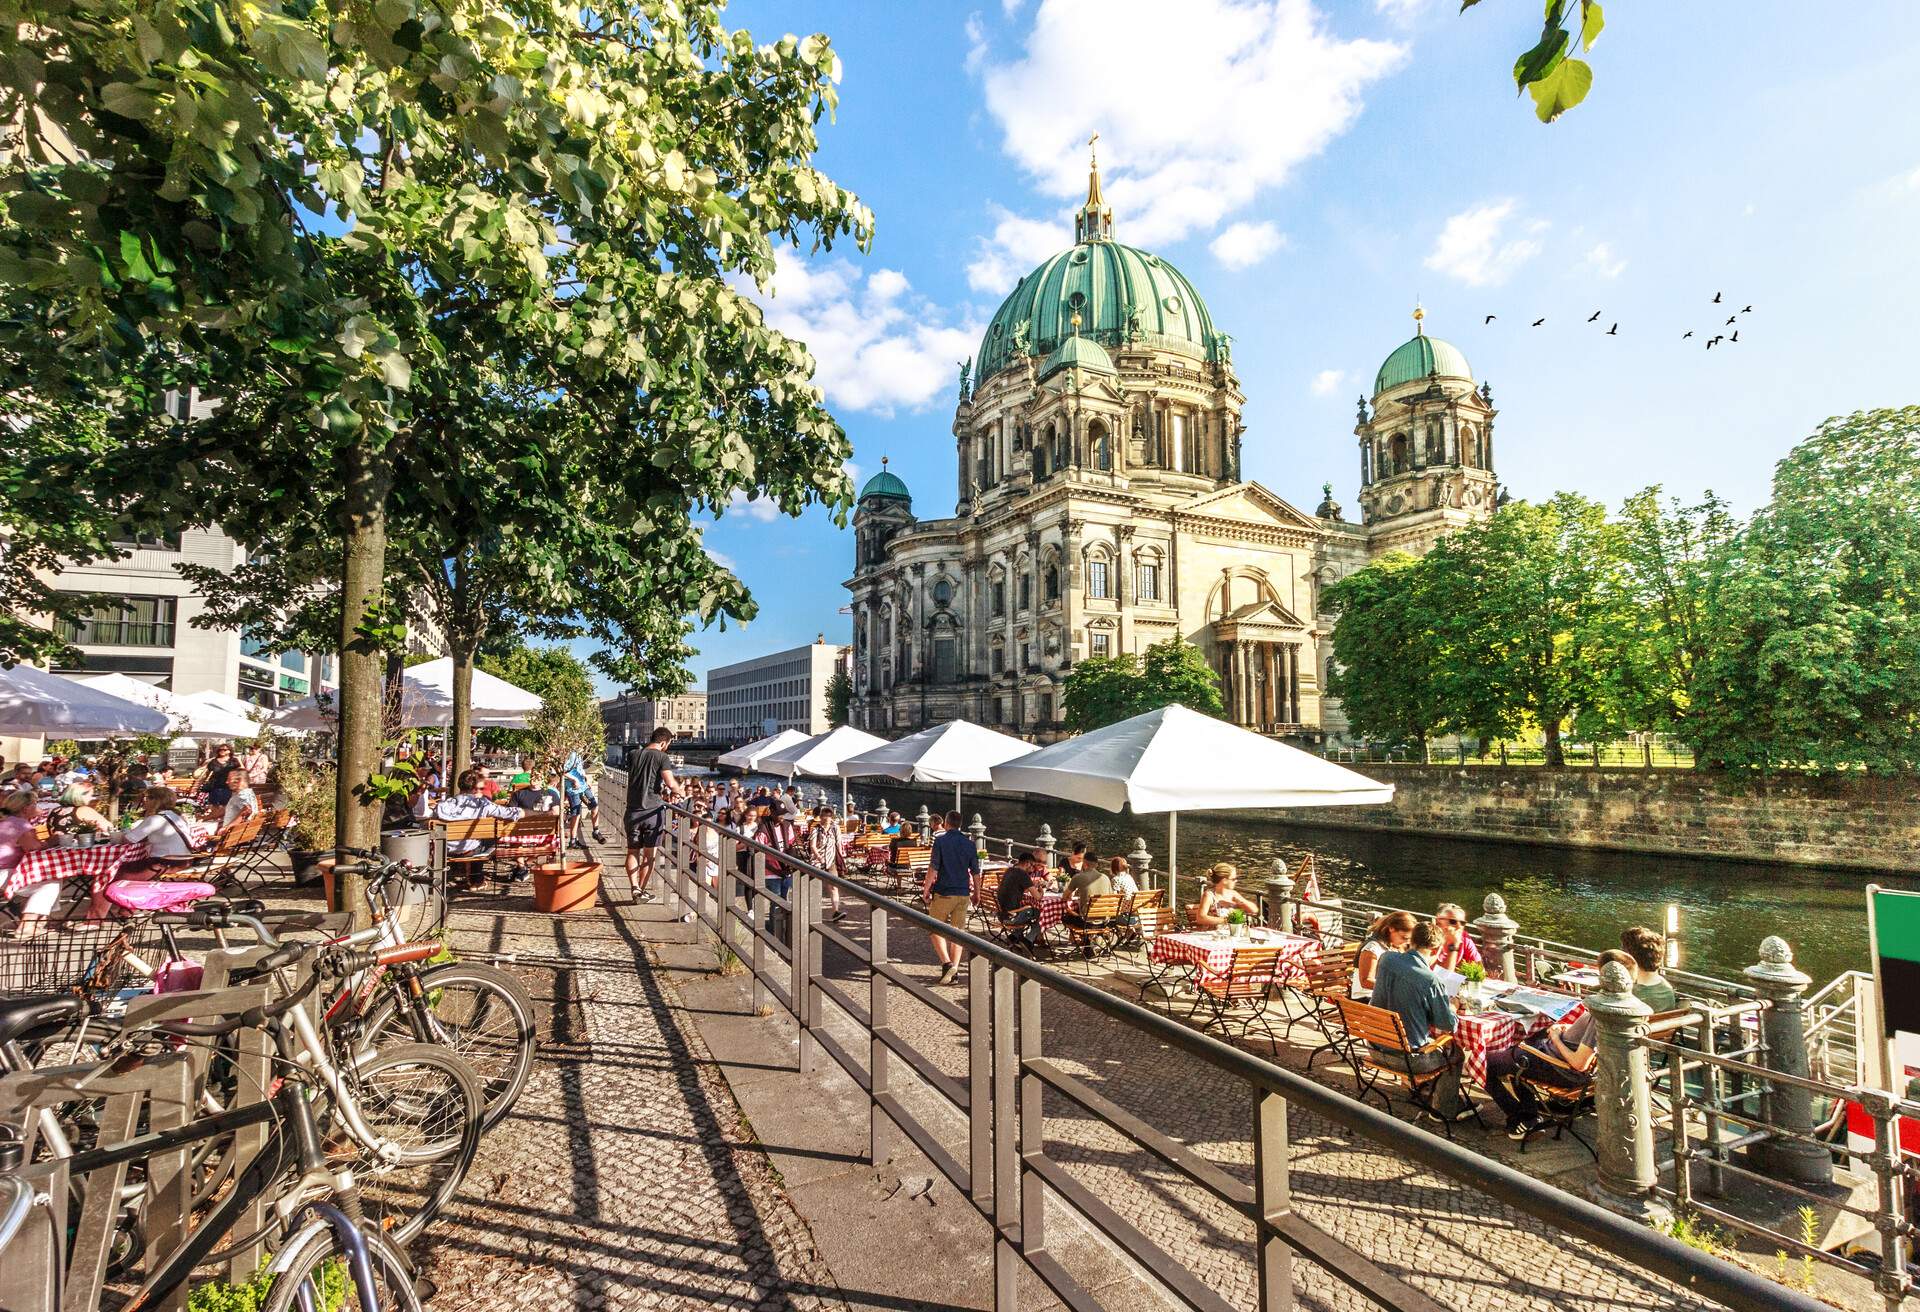 View of Spree River and Berliner Dom, Berlin, Germany